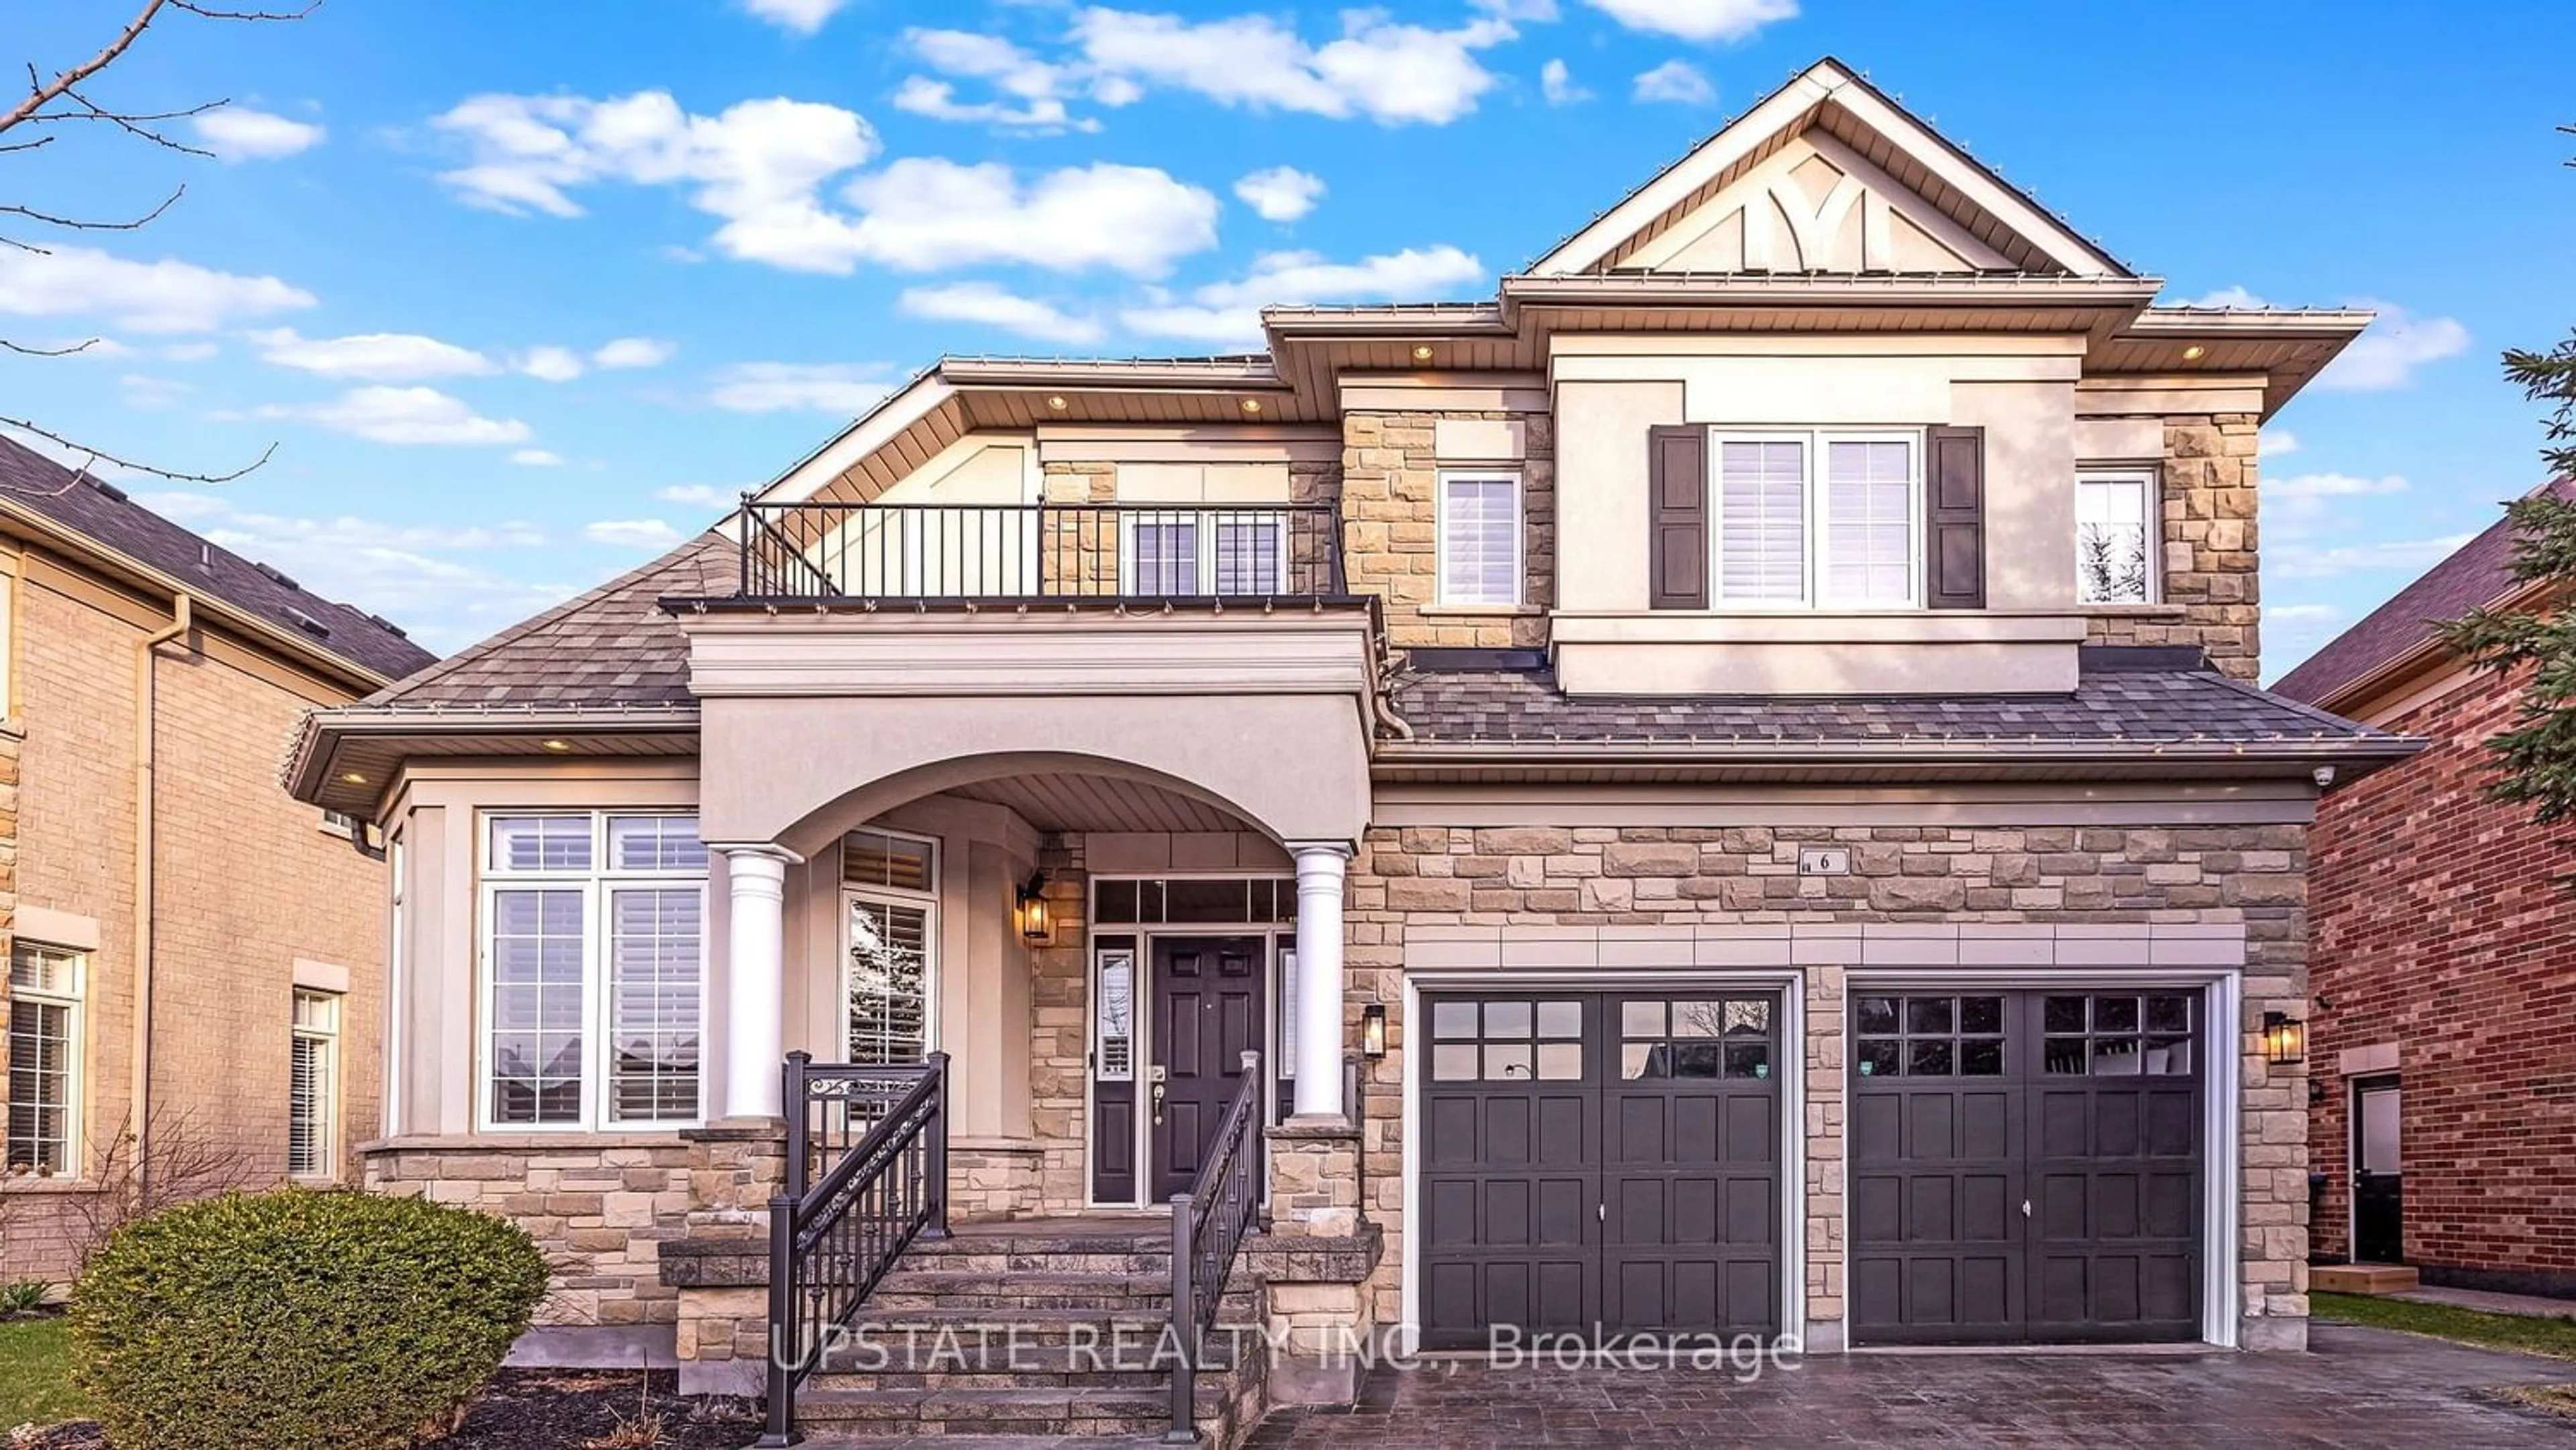 Home with brick exterior material for 6 Grouse Lane, Brampton Ontario L6Y 5L1